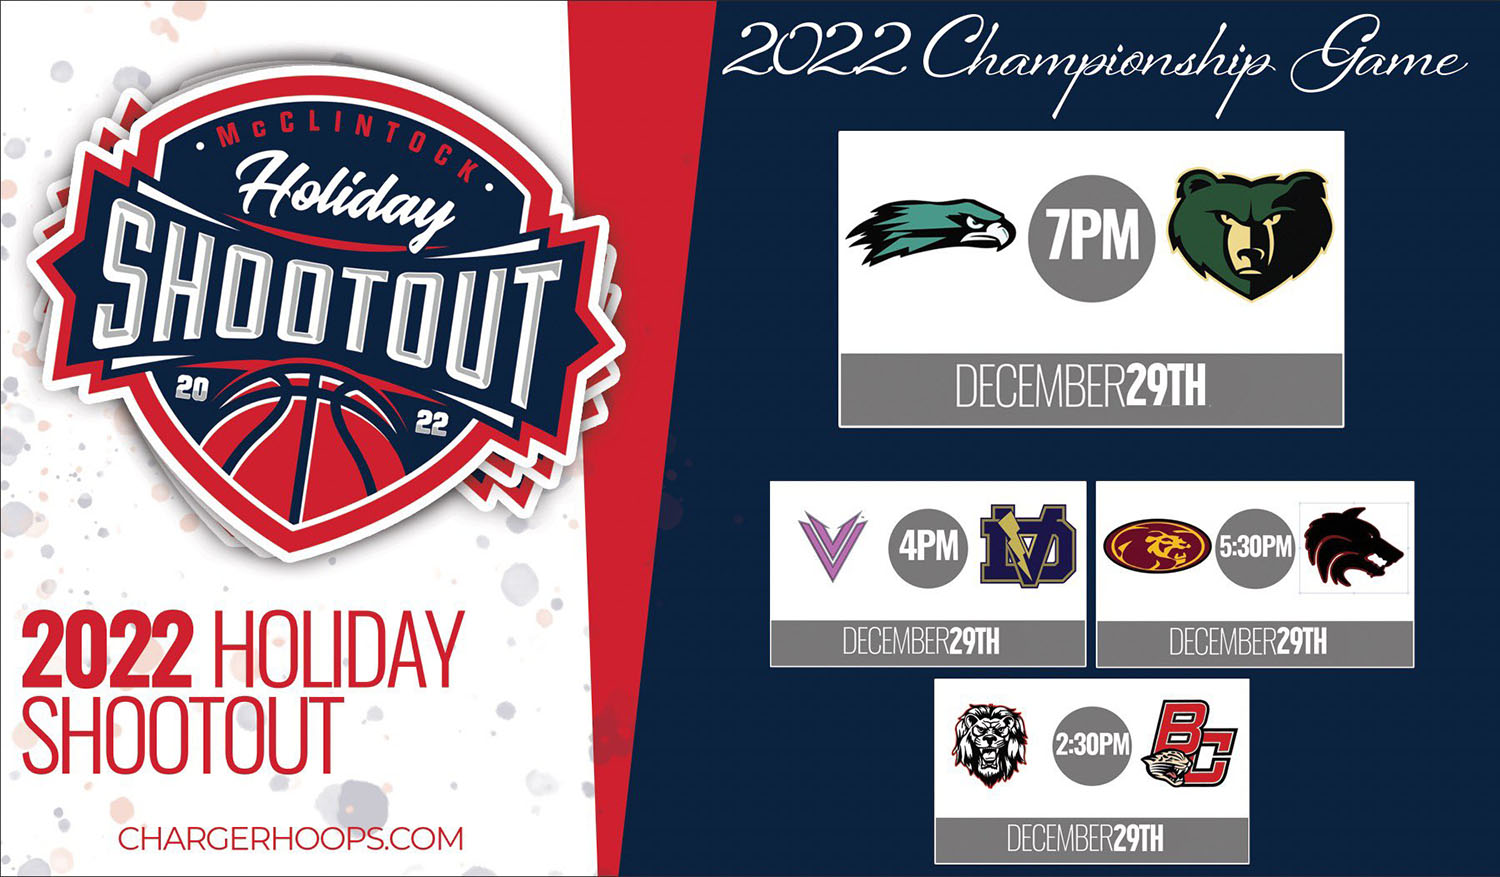 Championship Day of the McClintock Holiday Shootout 2022!